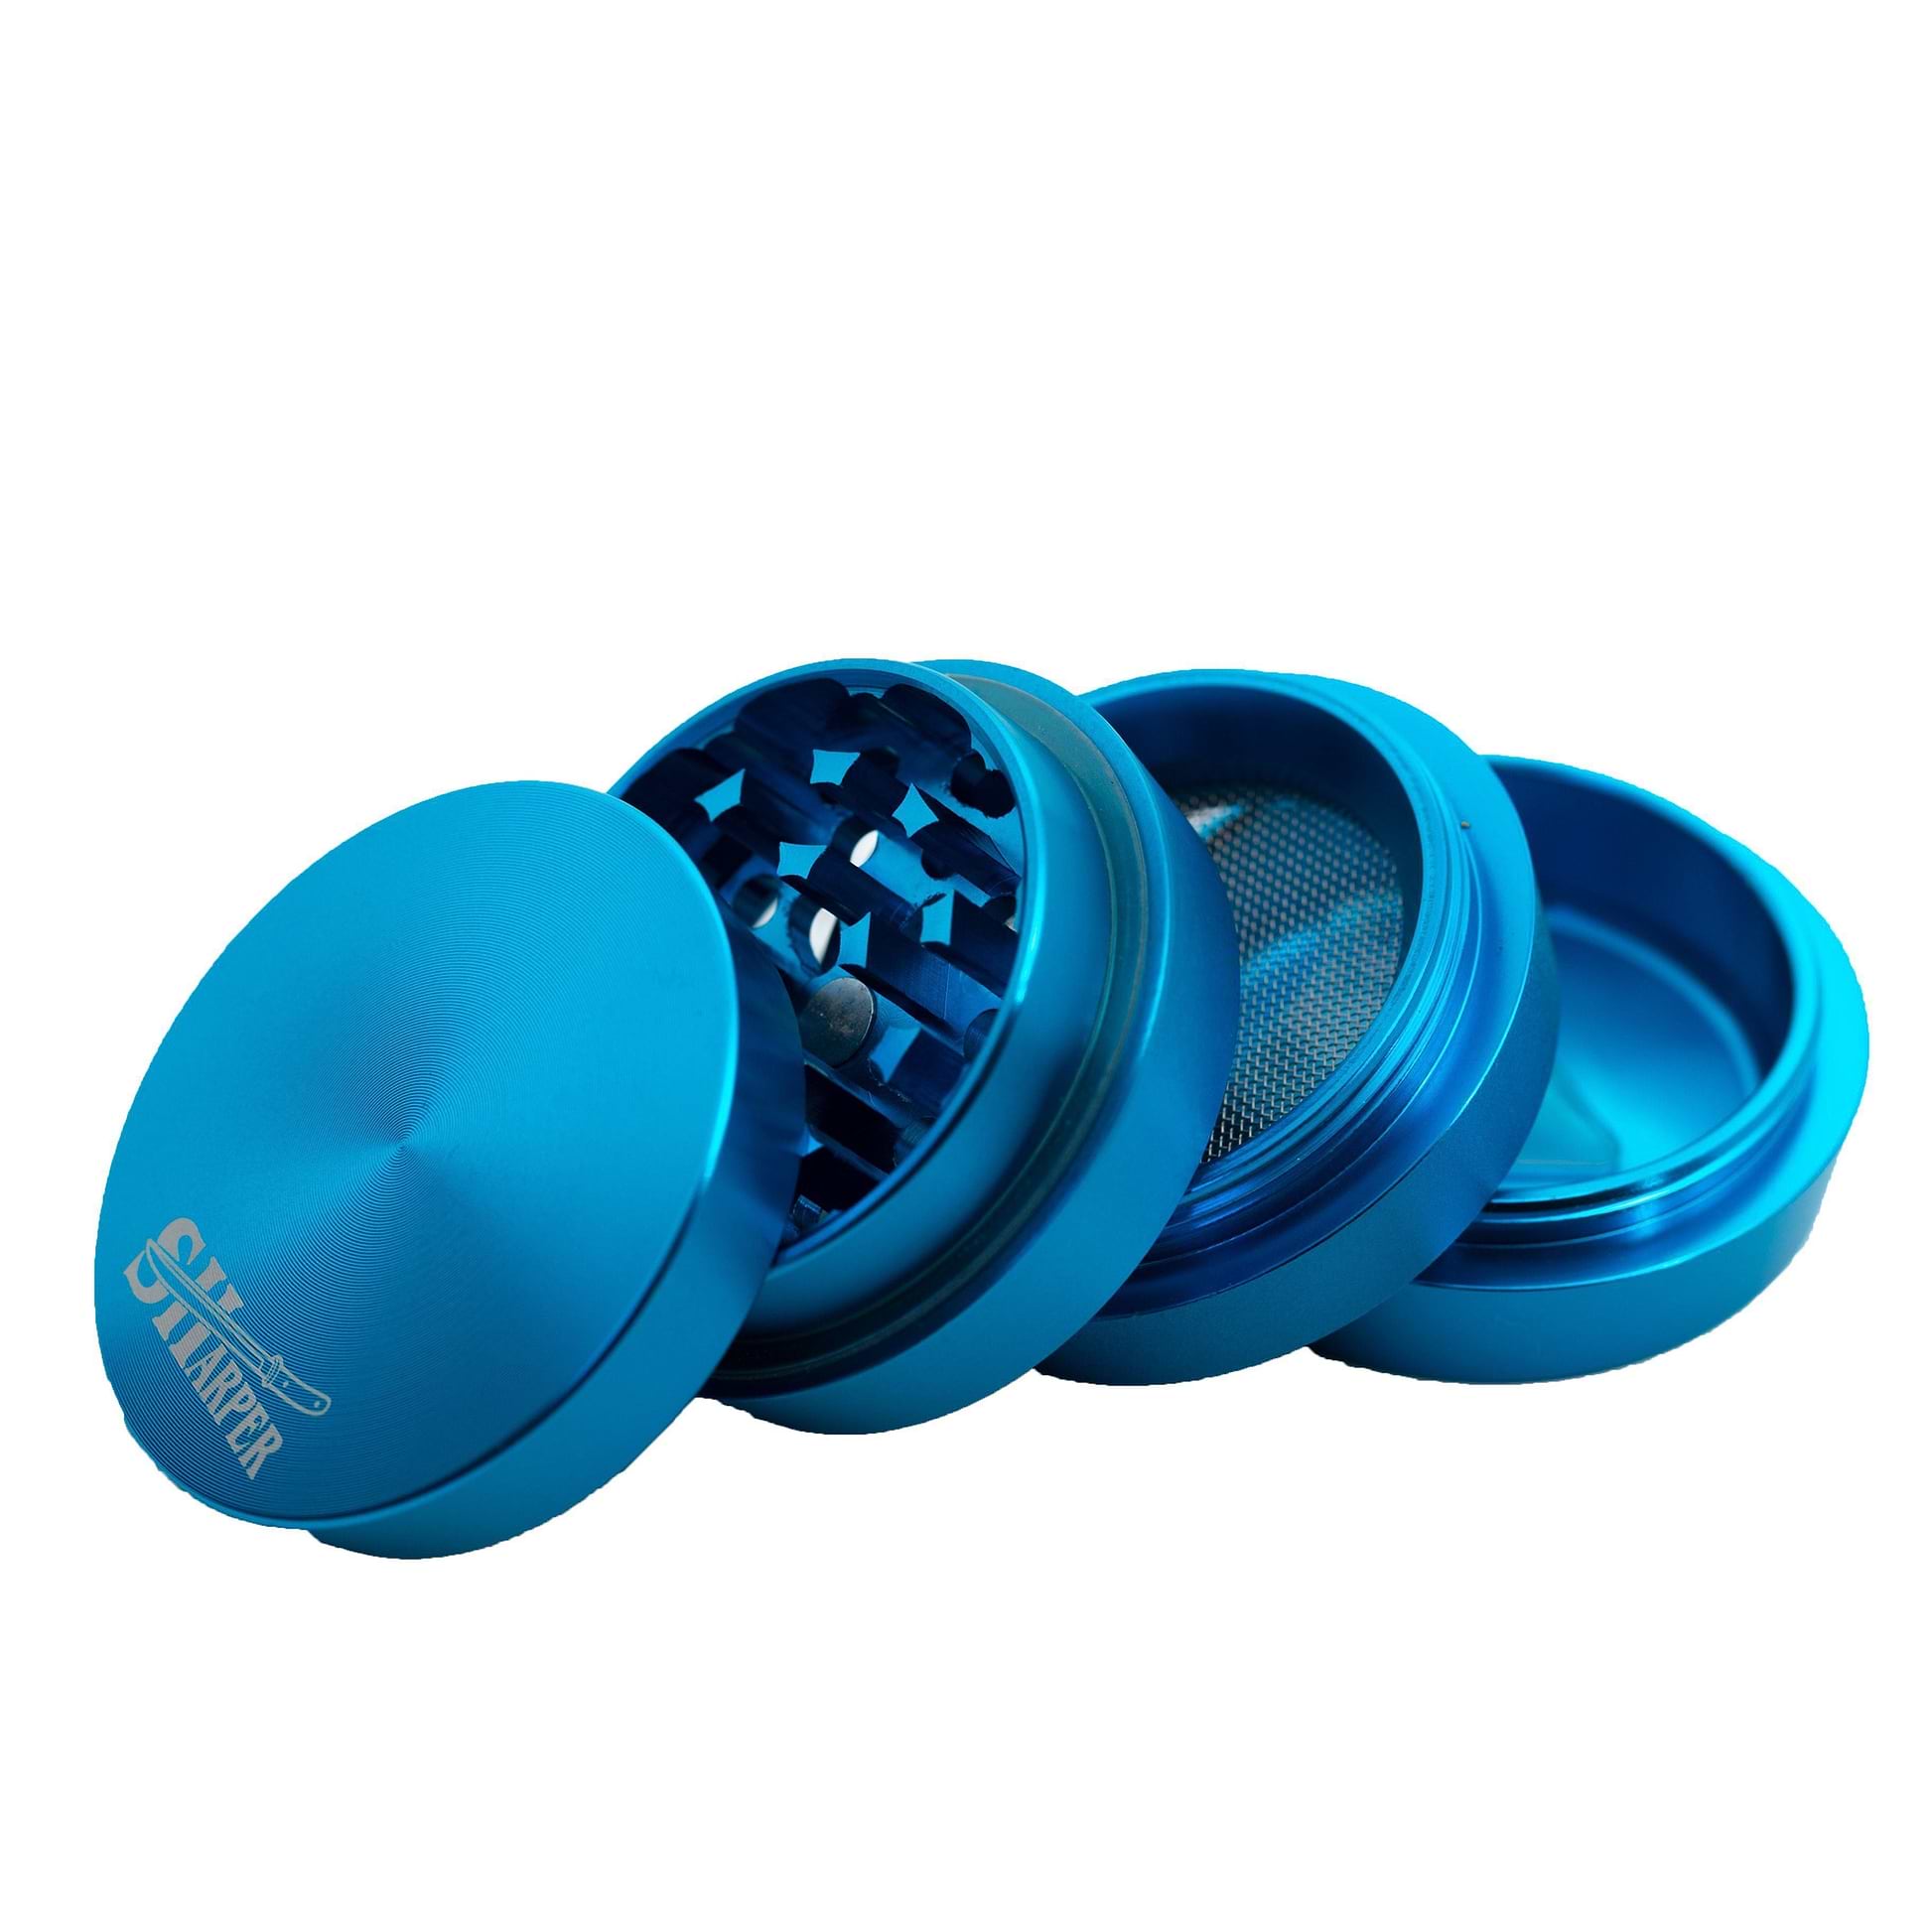 Blue 50-mm metal 4-piece grinder smoking accessory in metallic color sleek and edgy design